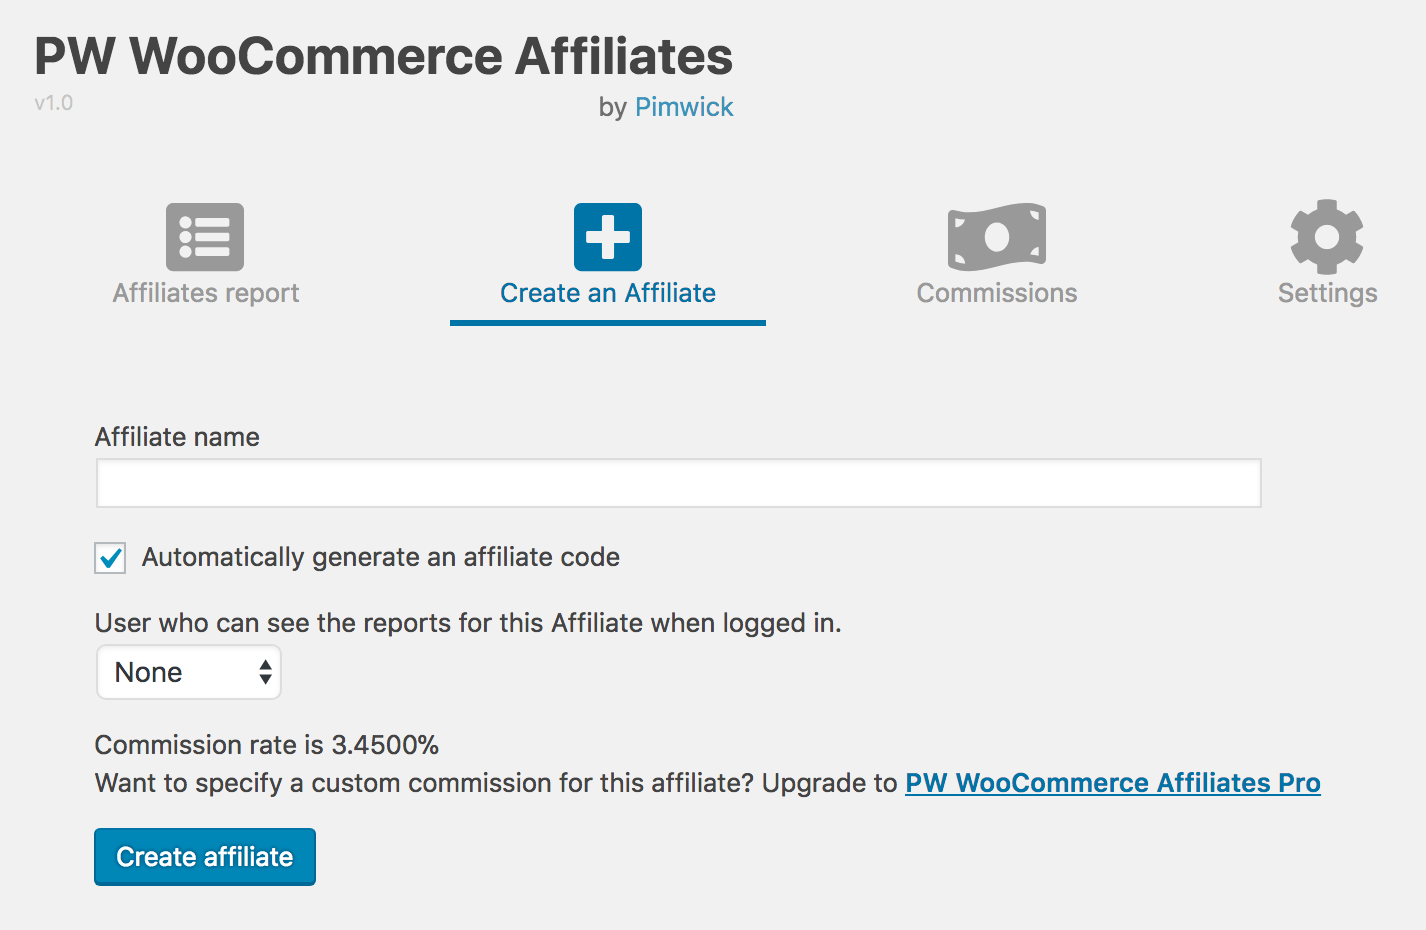 Creating an affiliate